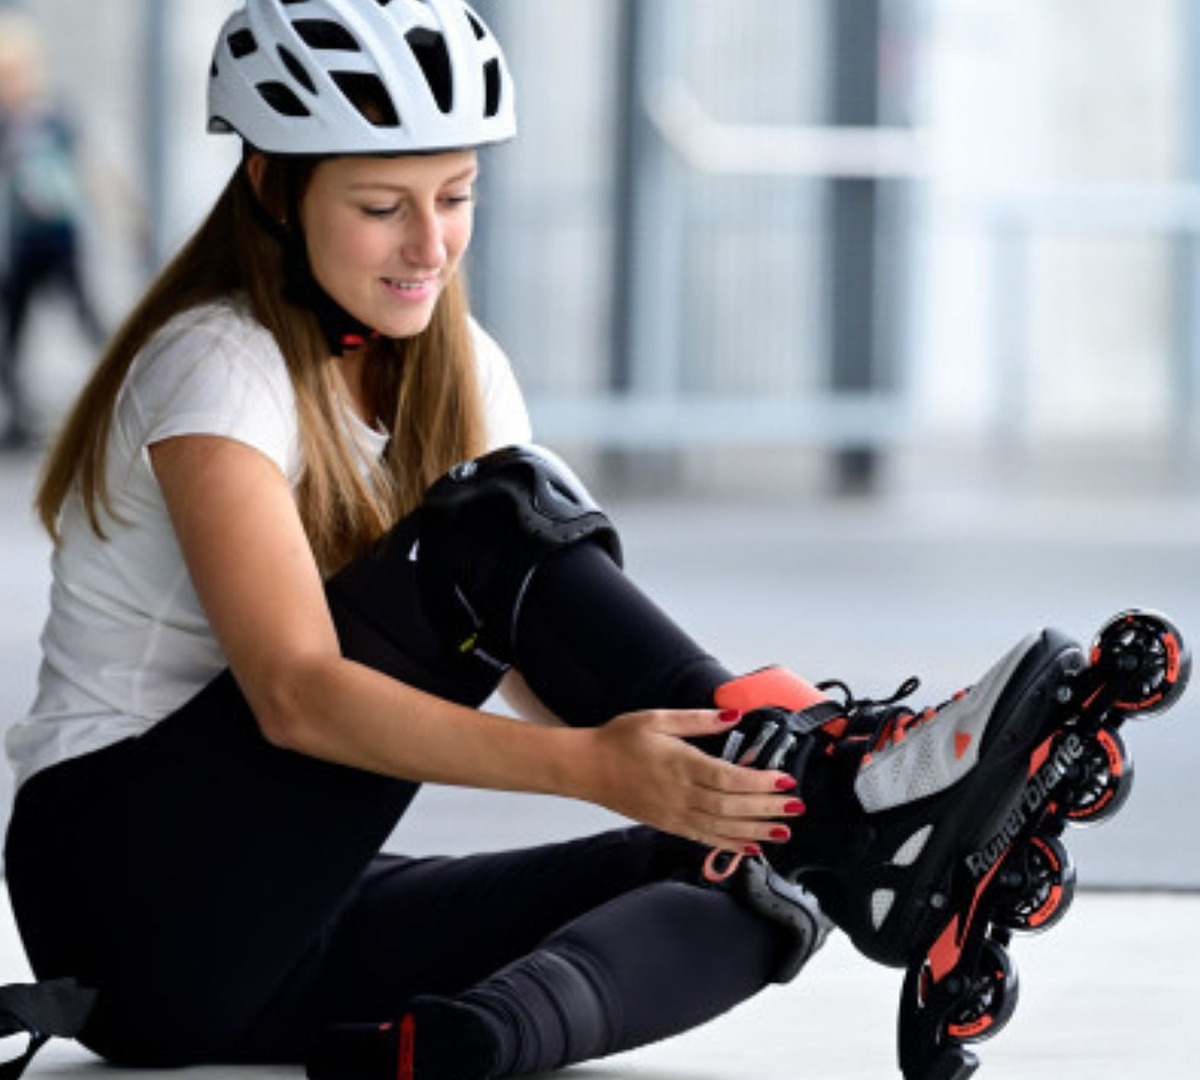 SkatingWithHelmets-Top-Rated-Skates-and-Scooters-for-all-Ages-and-Skill-Levels-at-Decathlon